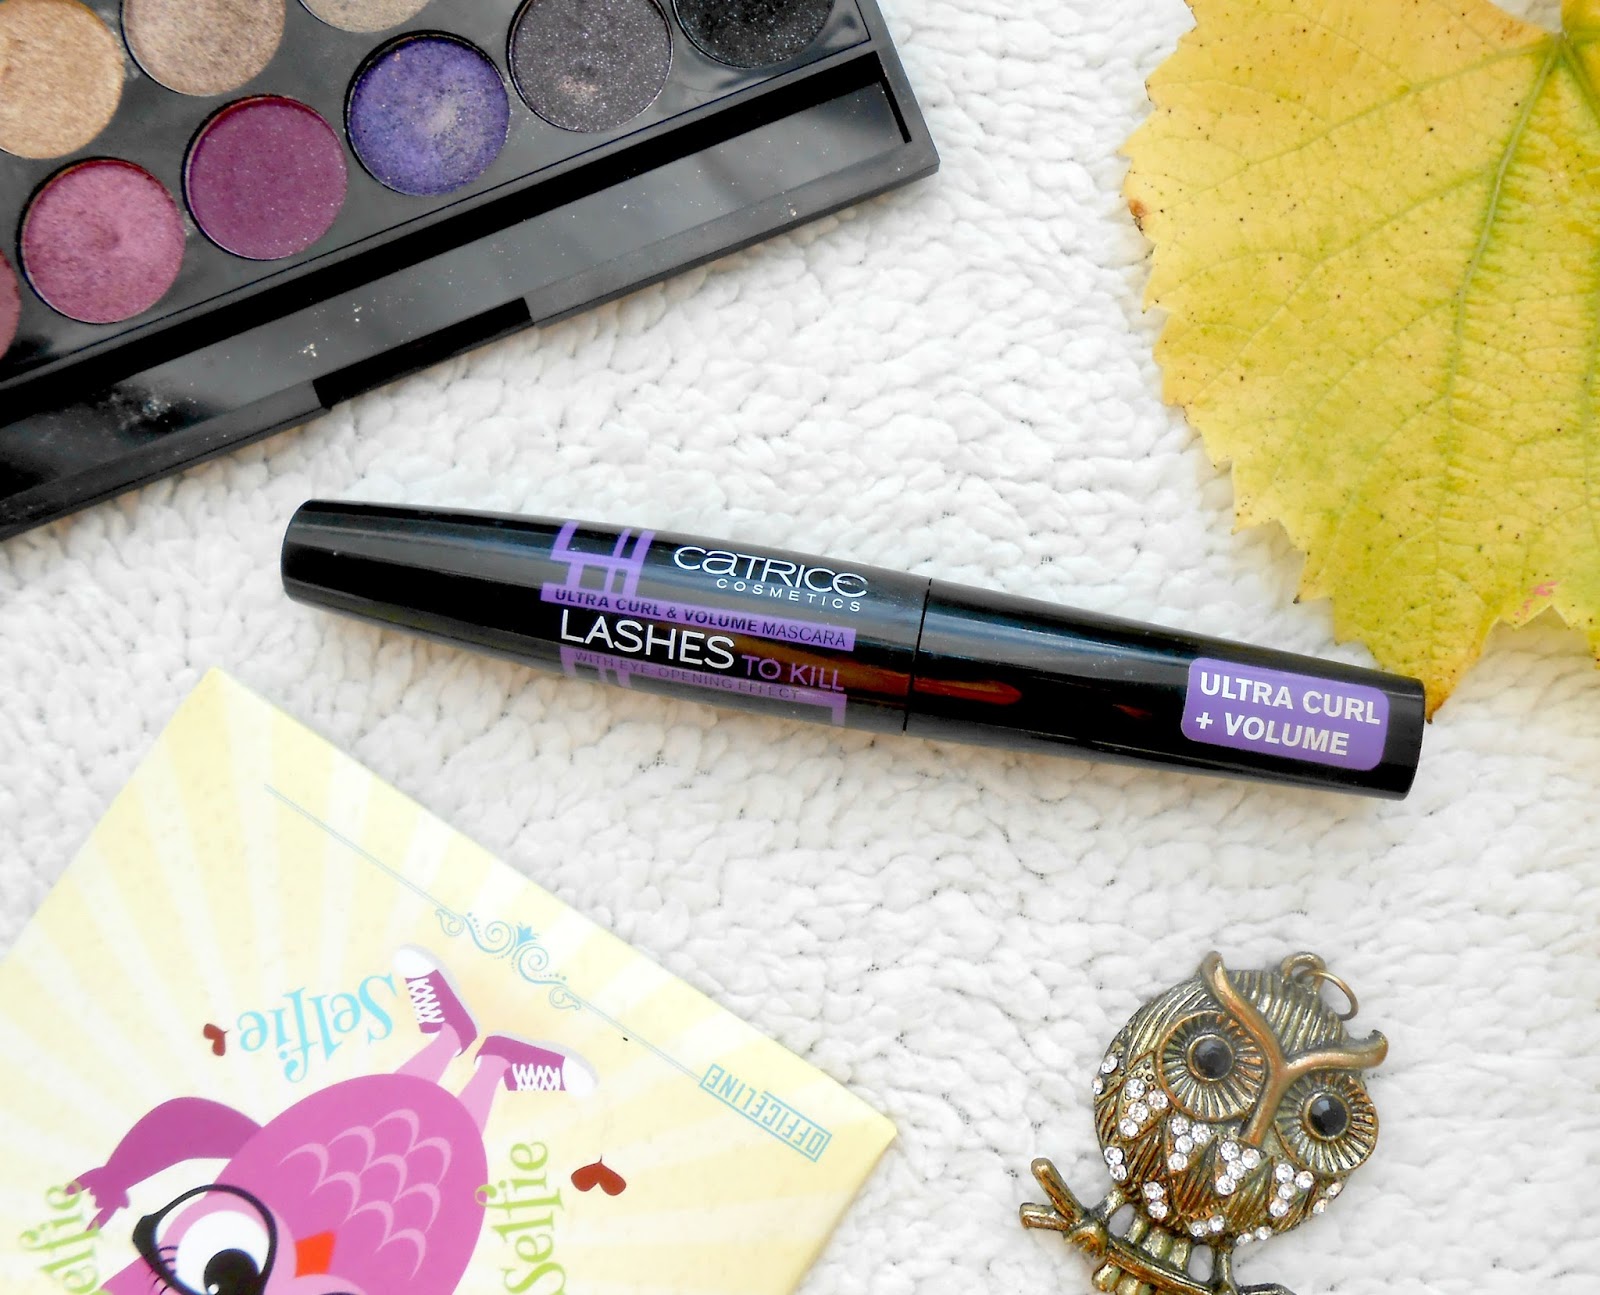 Lashes - Review: Kill suns Beauty the of to Catrice and Curl Volume Amazing